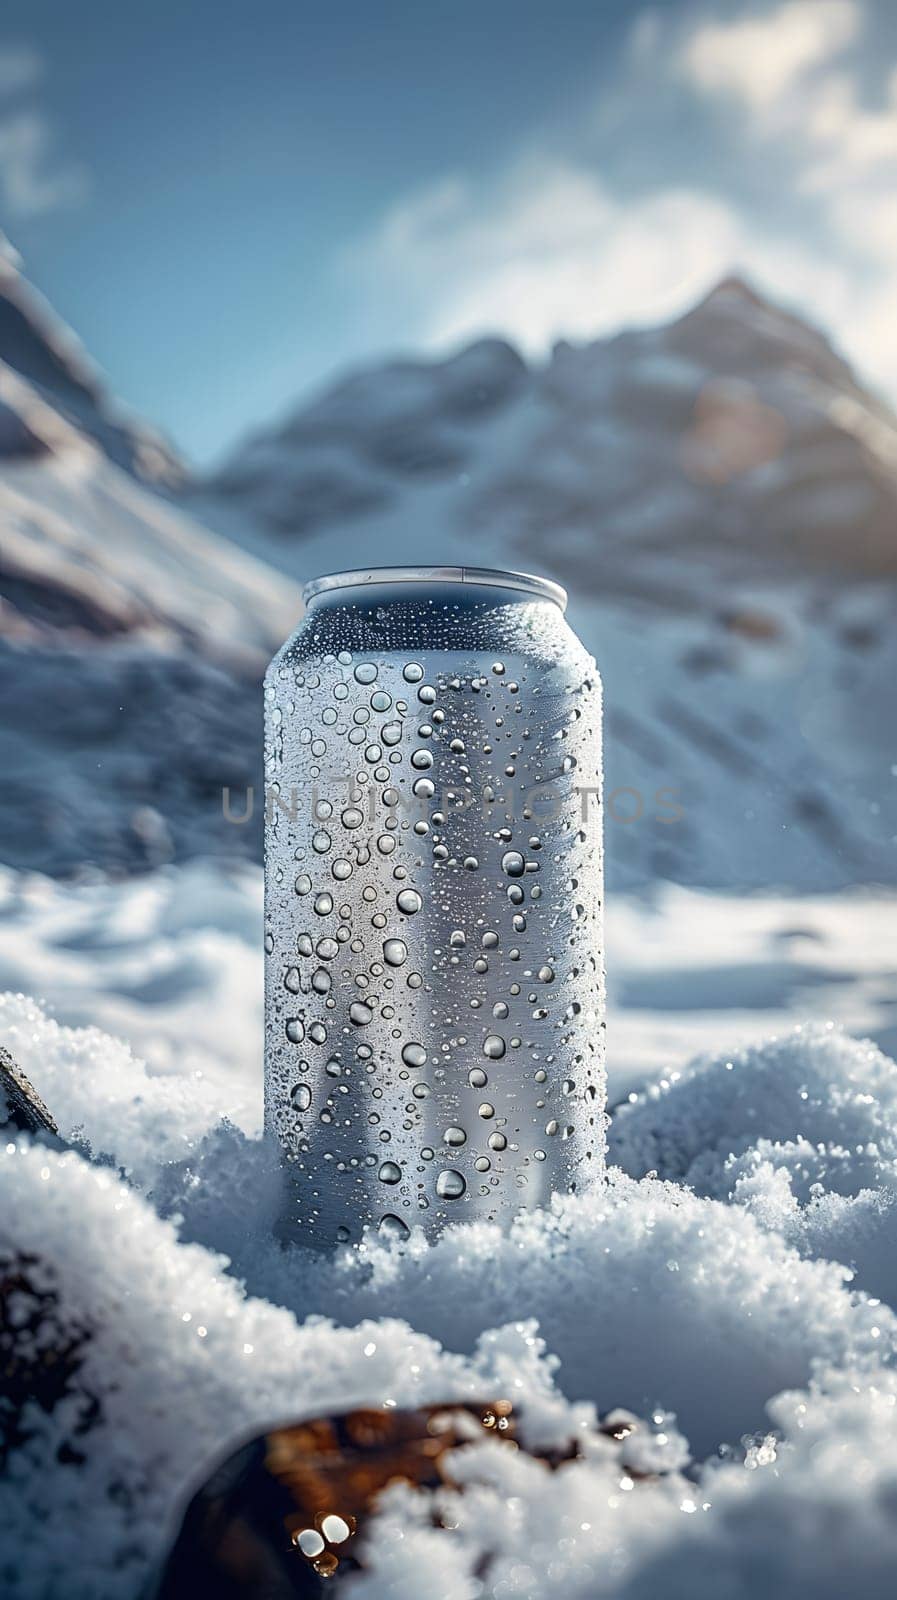 Can of beer in snow, mountains, freezing atmosphere by Nadtochiy